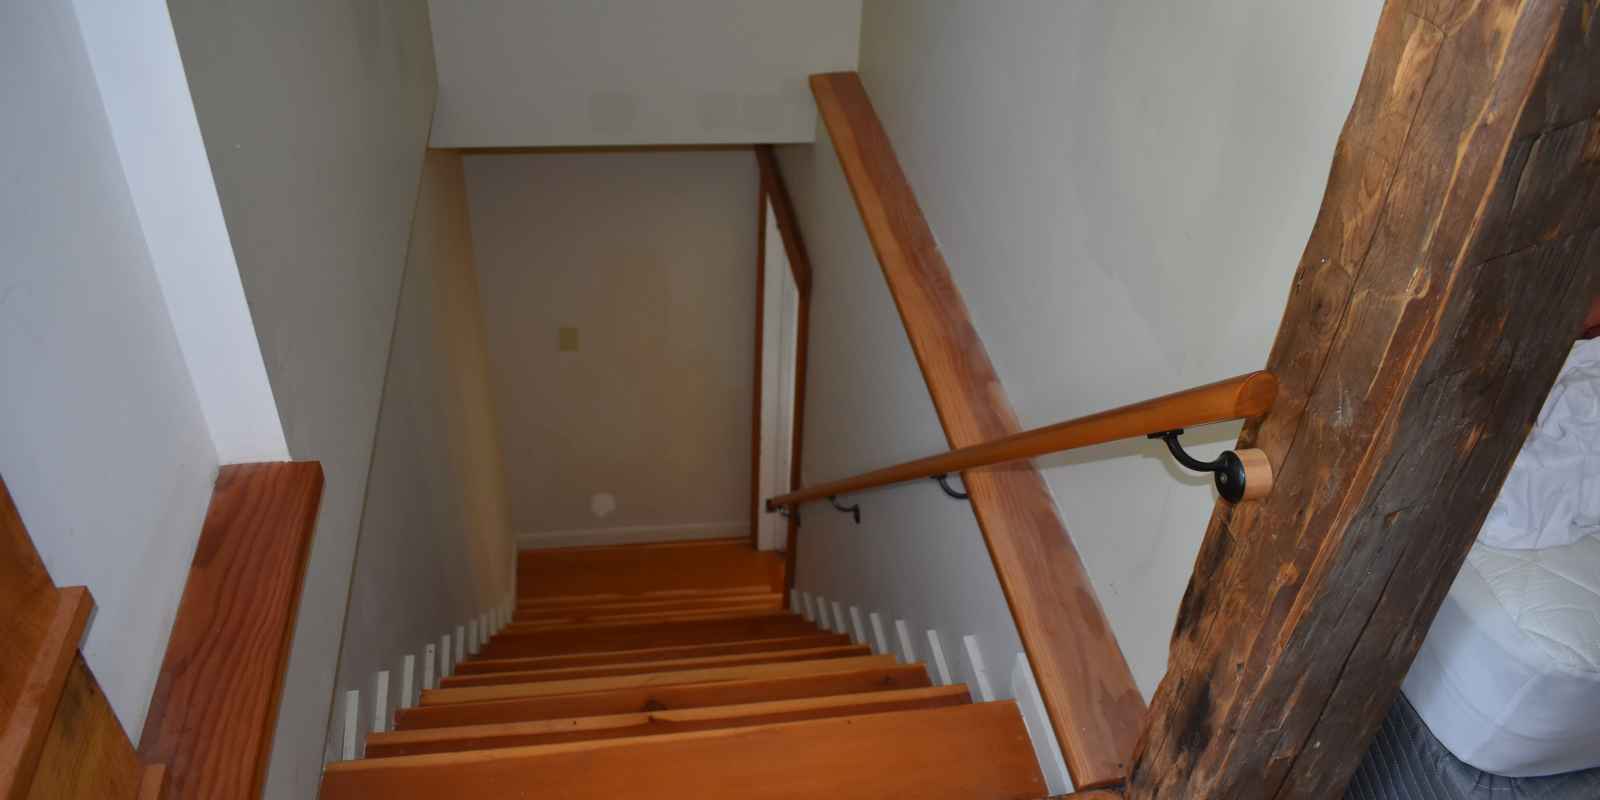 Photo looking down stairwell from the landing where officers wrestled J.A. to the ground